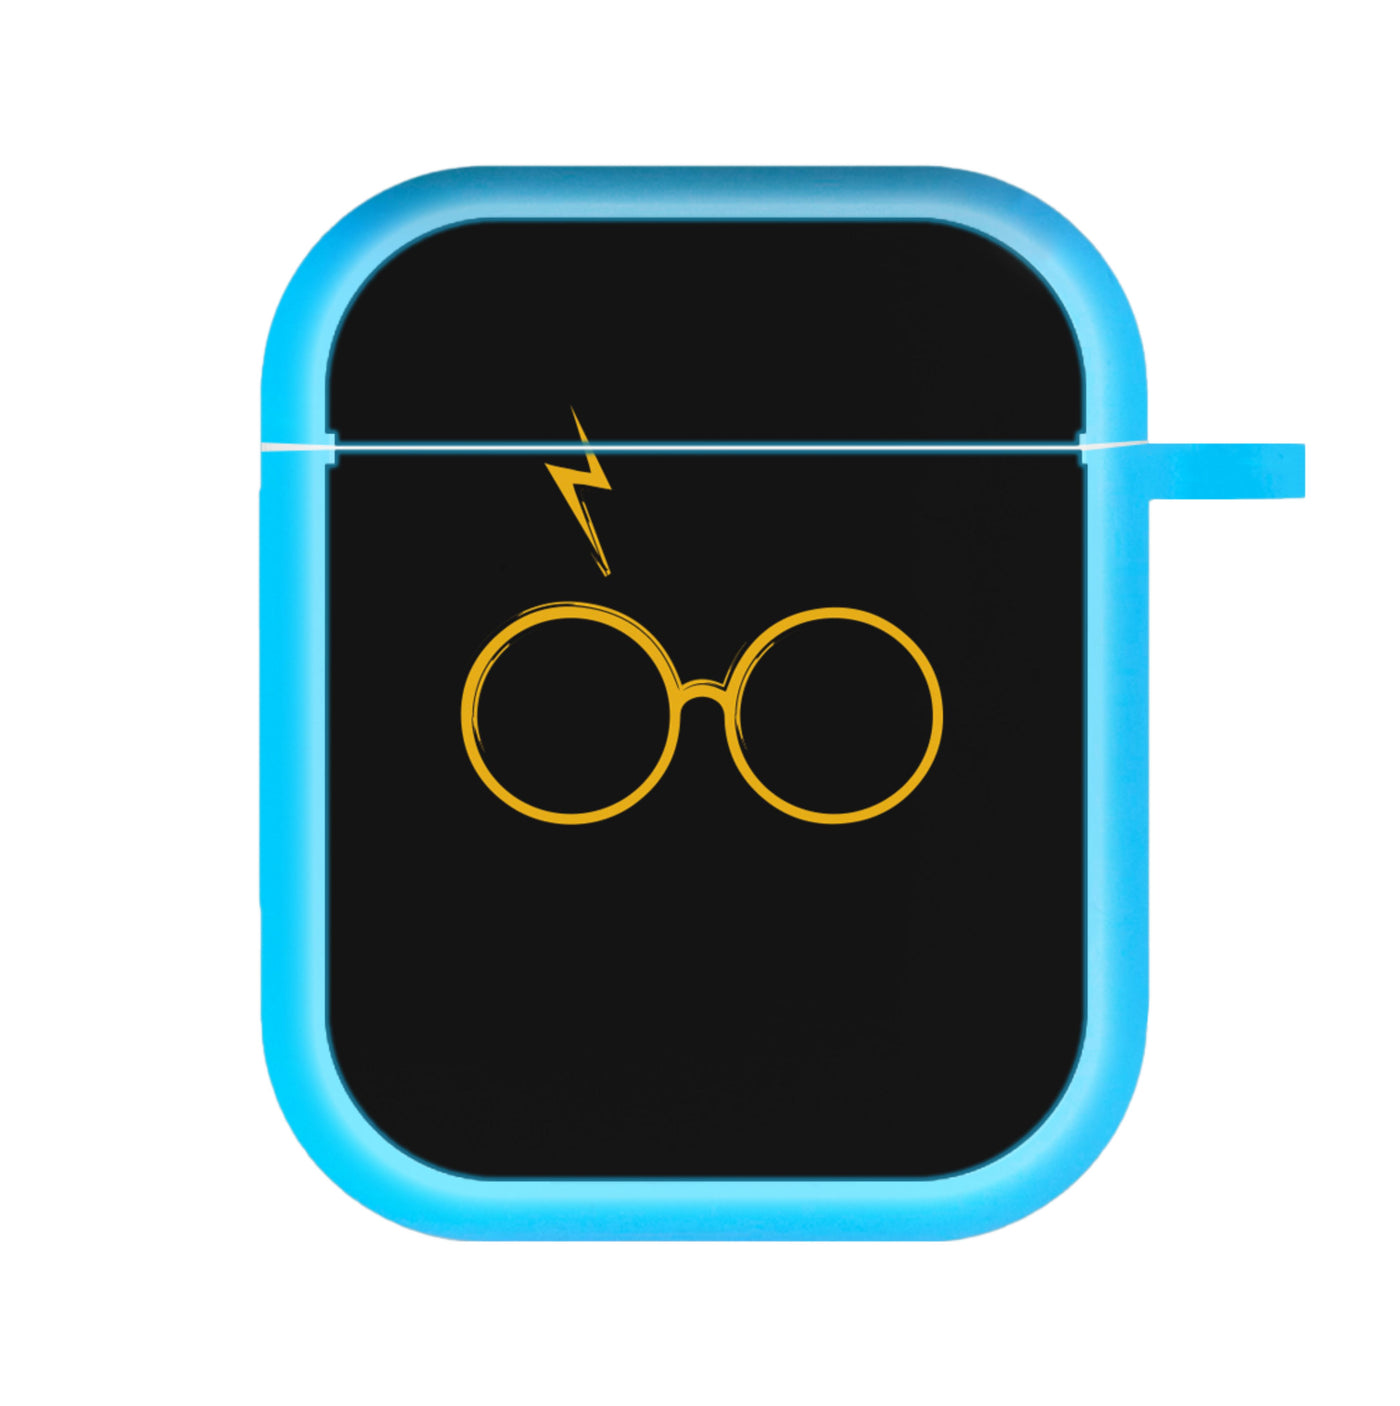 Glasses & Scar - Harry Potter AirPods Case